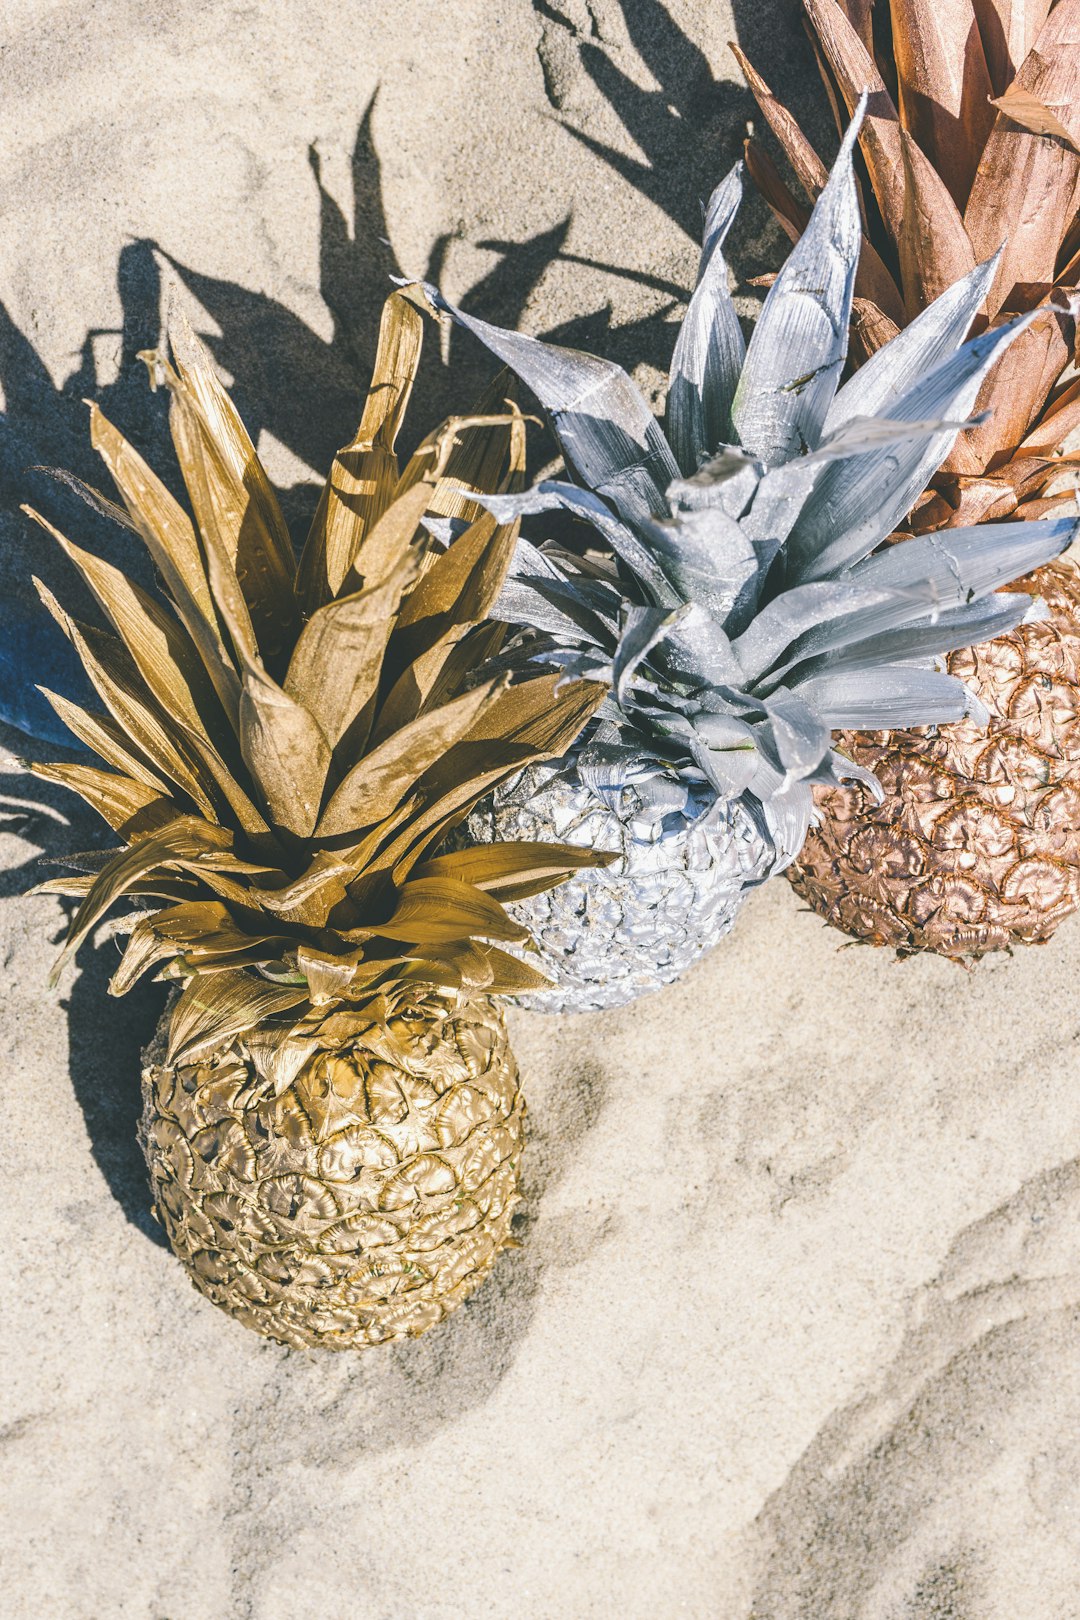 gold, silver, bronze pineapple in sand